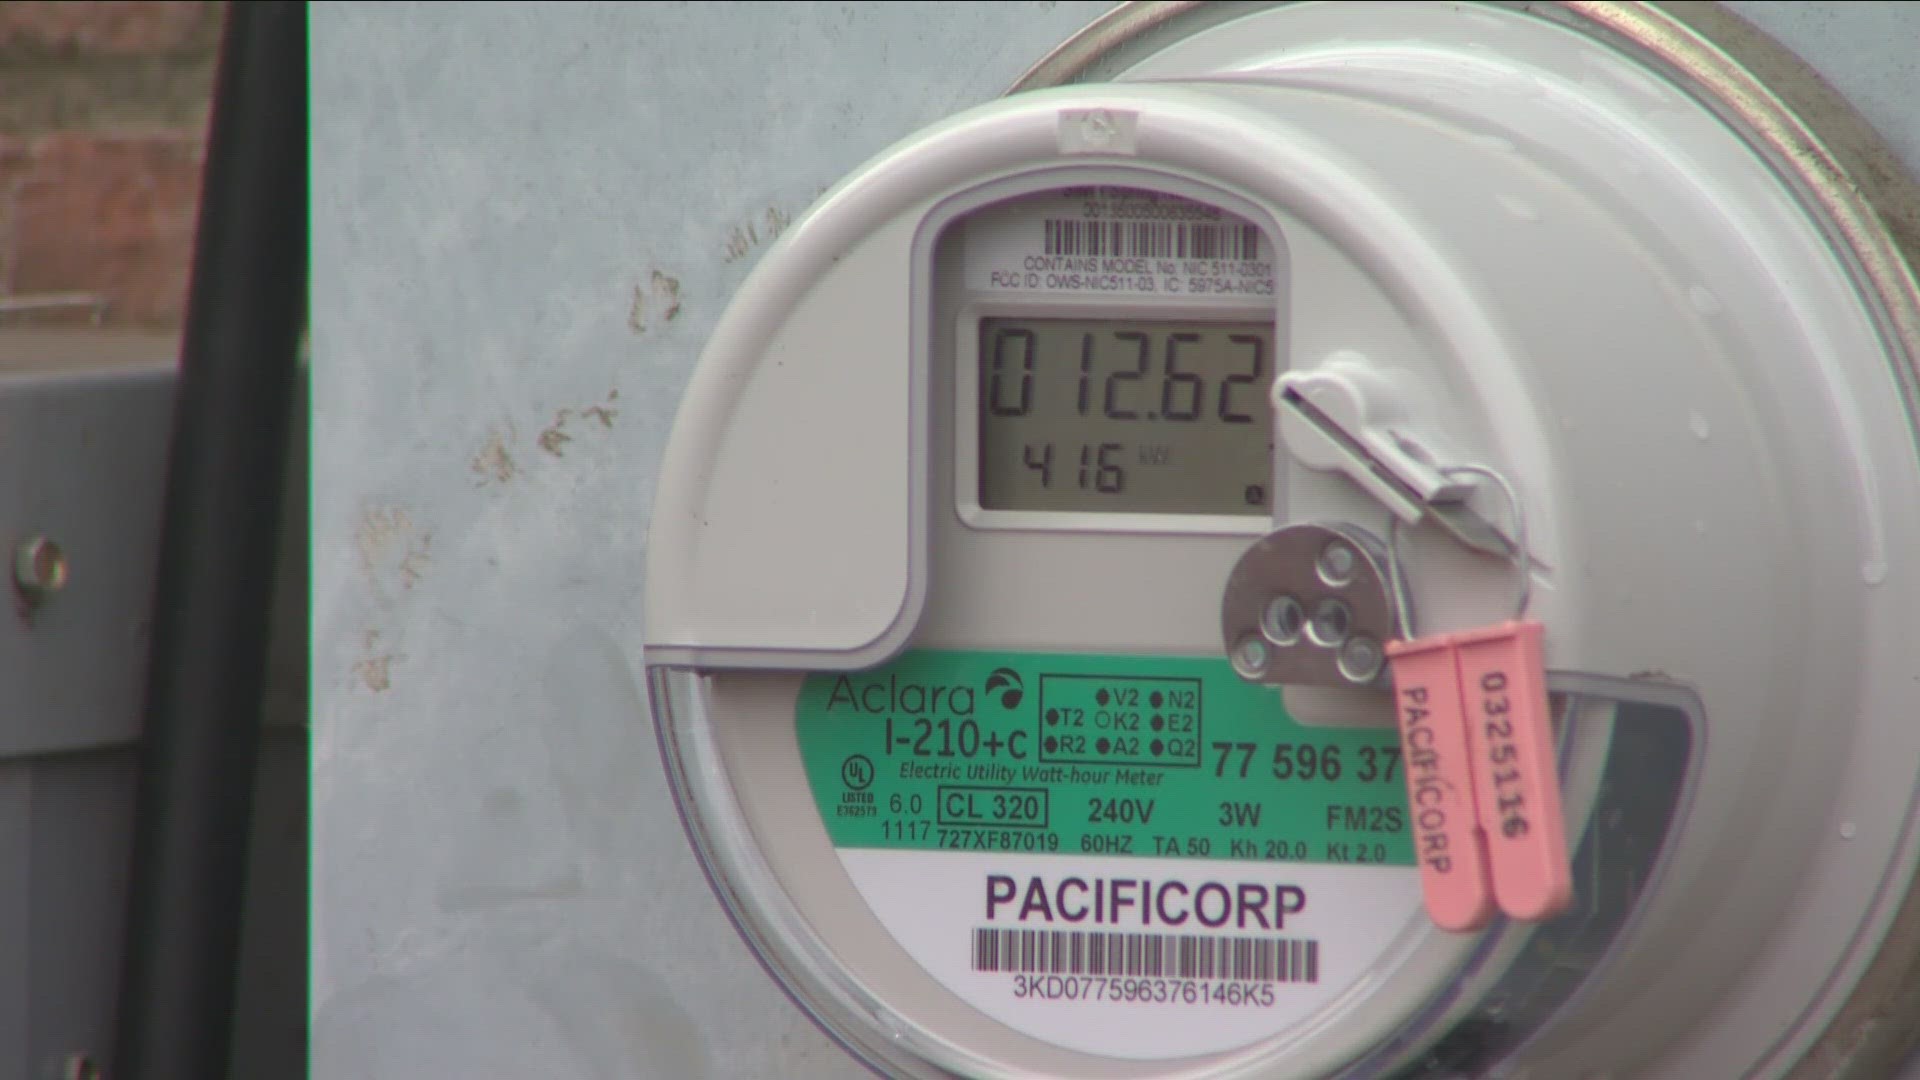 Smart meters will transmit meter readings directly to NYSEG